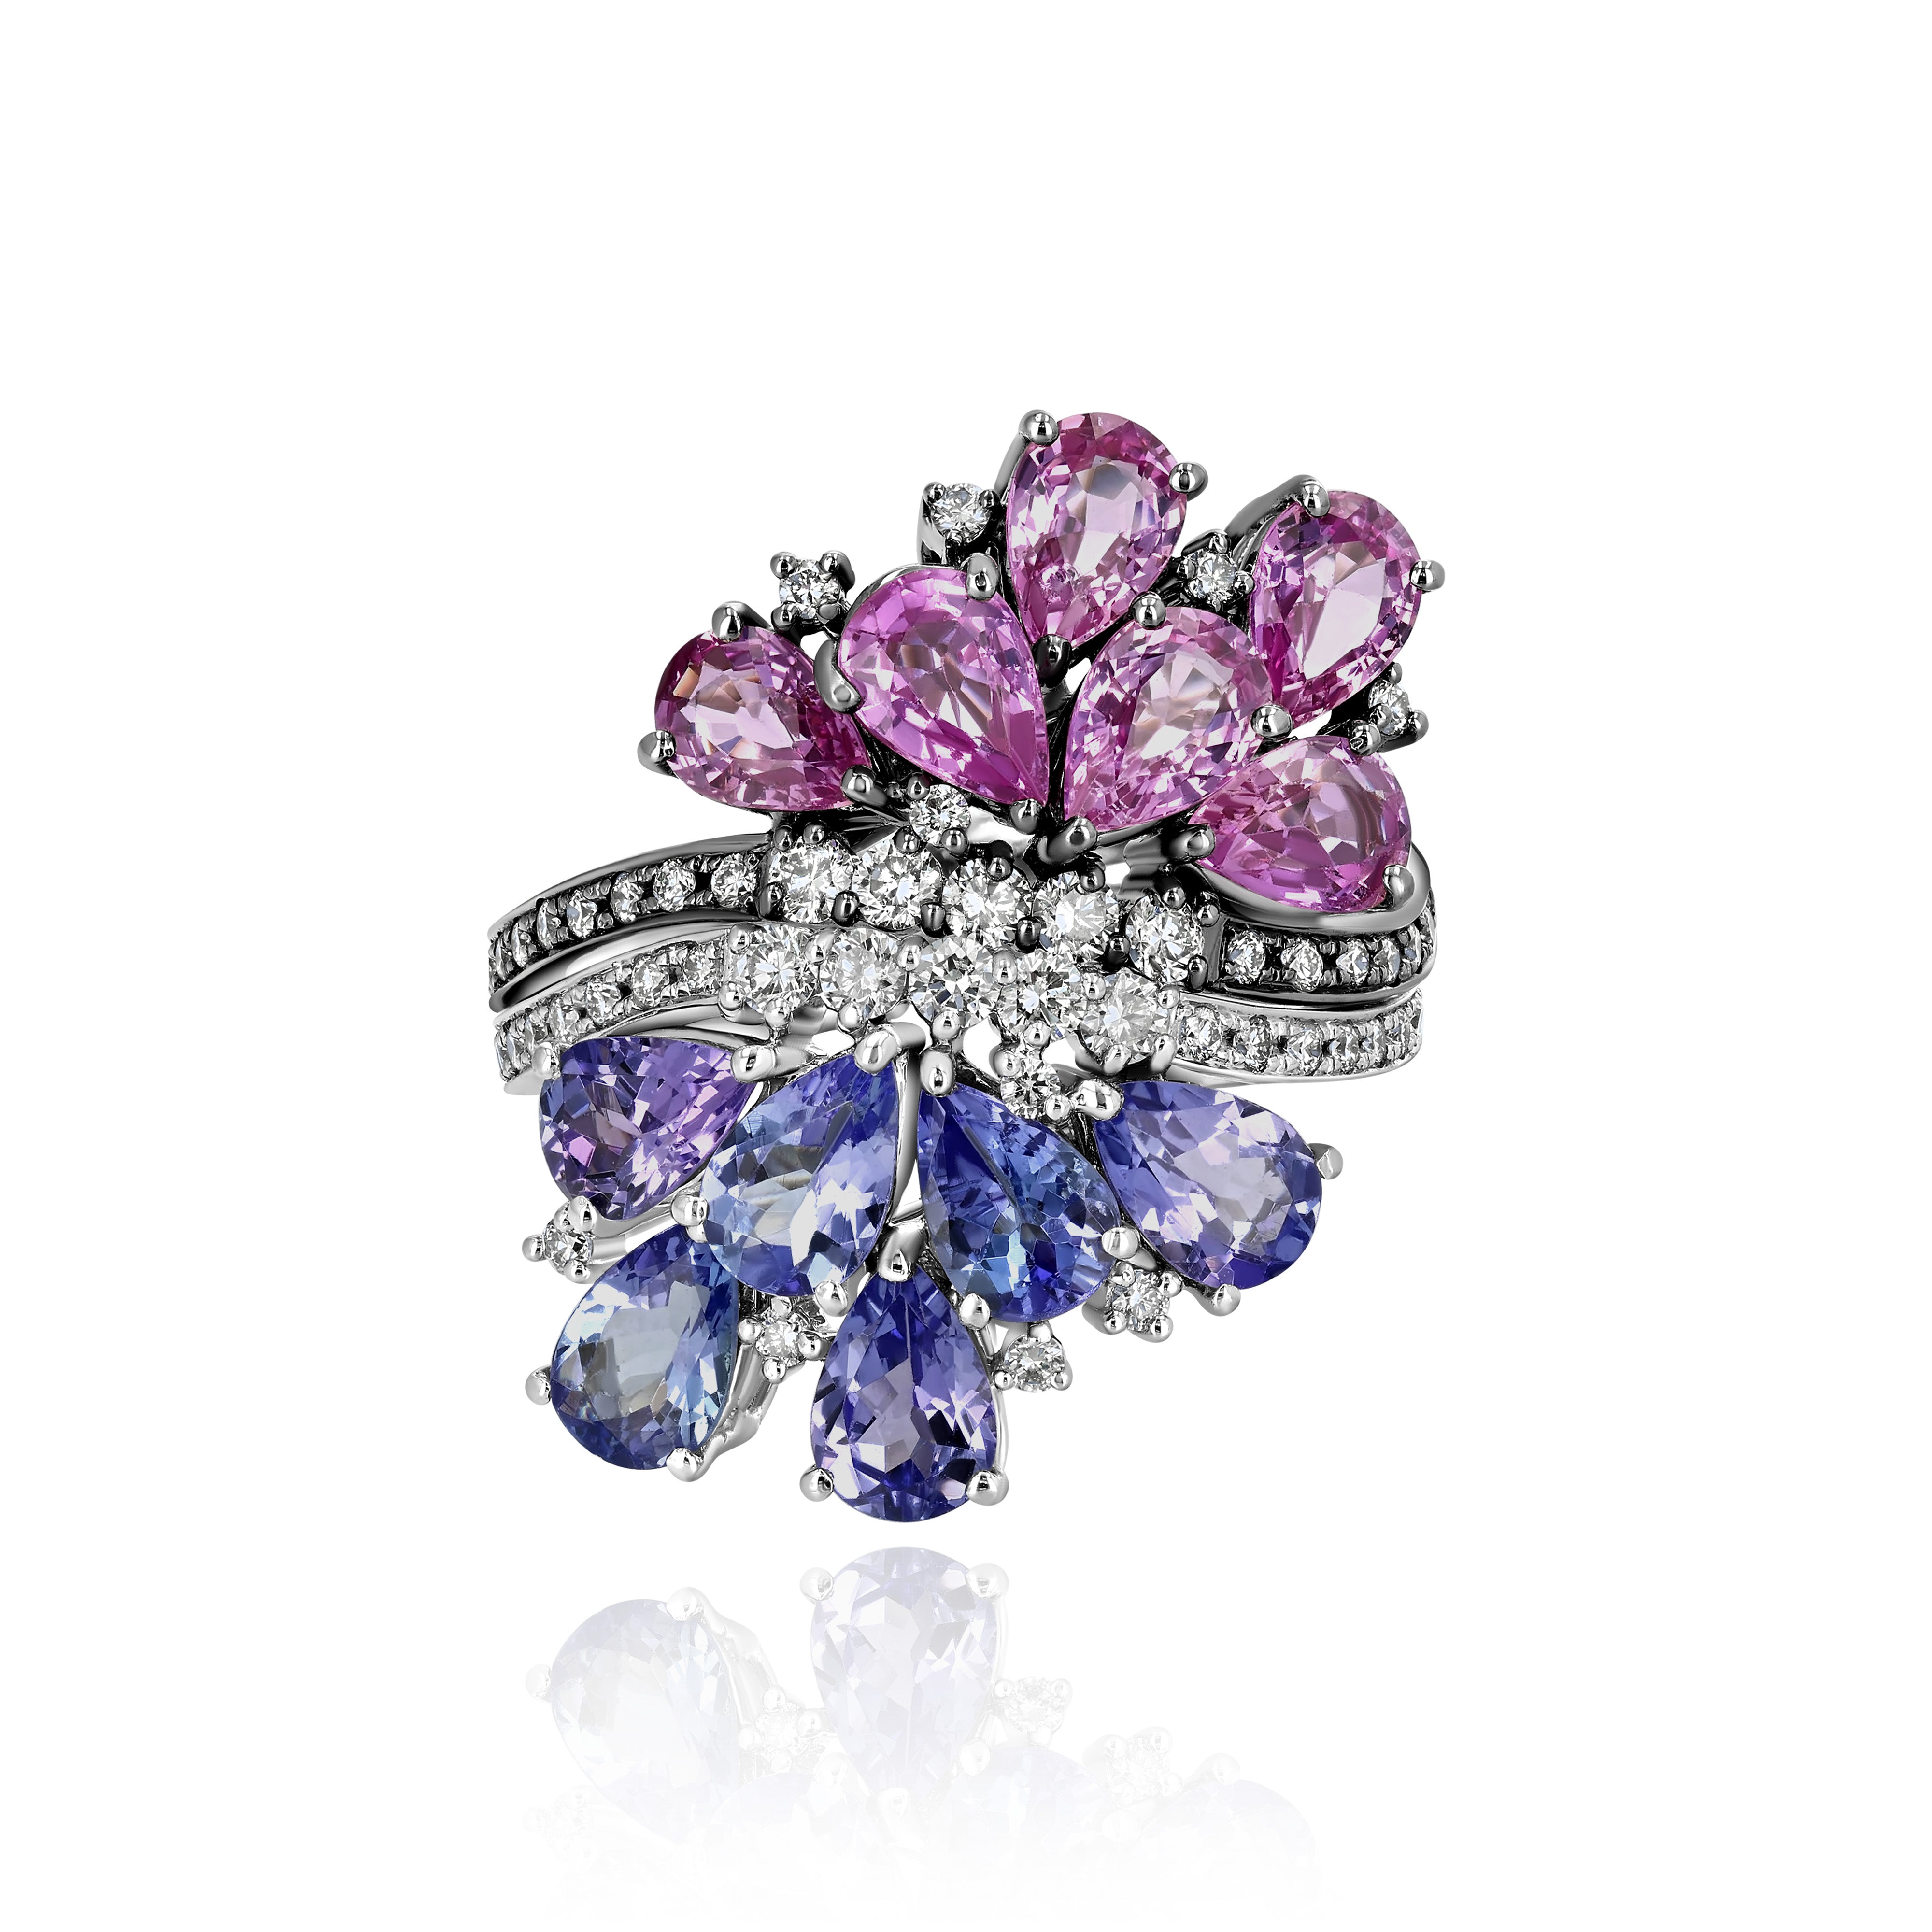 Diamond dual Ring - half Rhodium Plated Gold and Pink Sapphire, half White Gold and Tanzanite, Large